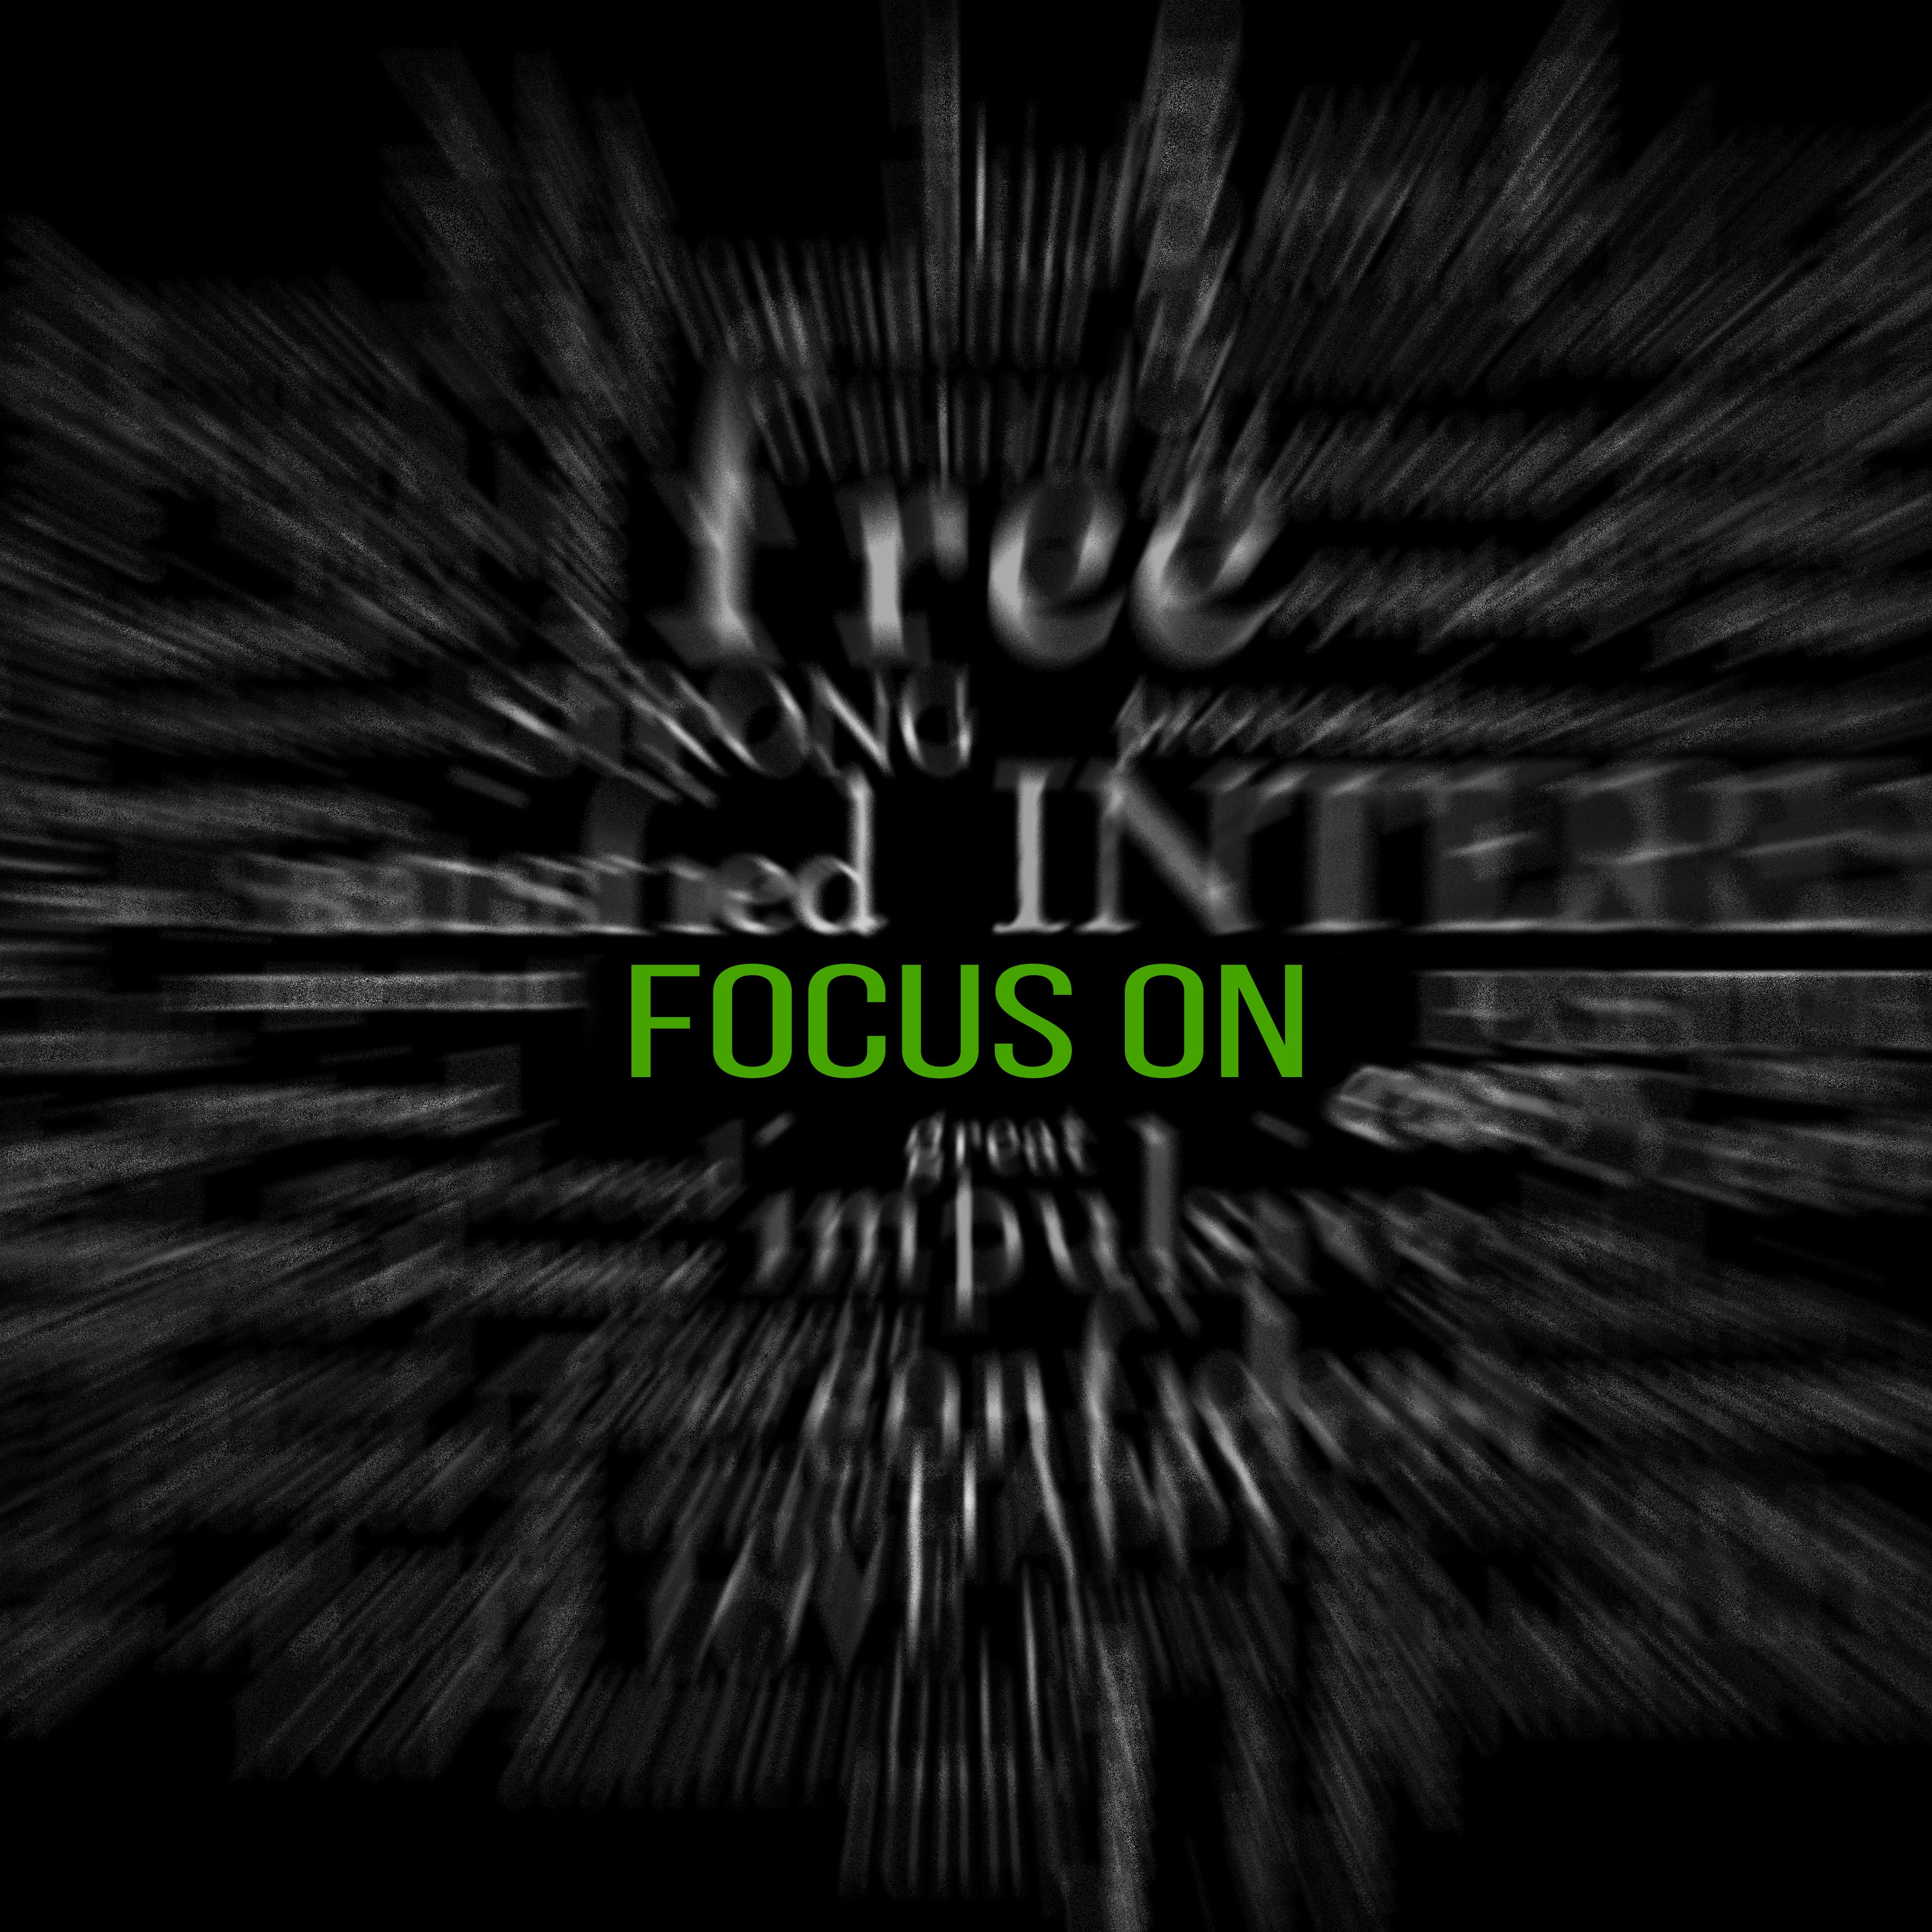 Focus On – Concentration Music for Learning, Studying and Reading, Powerful Alpha Waves, Improve Memory and Creative Thinking, Exam Study Skills